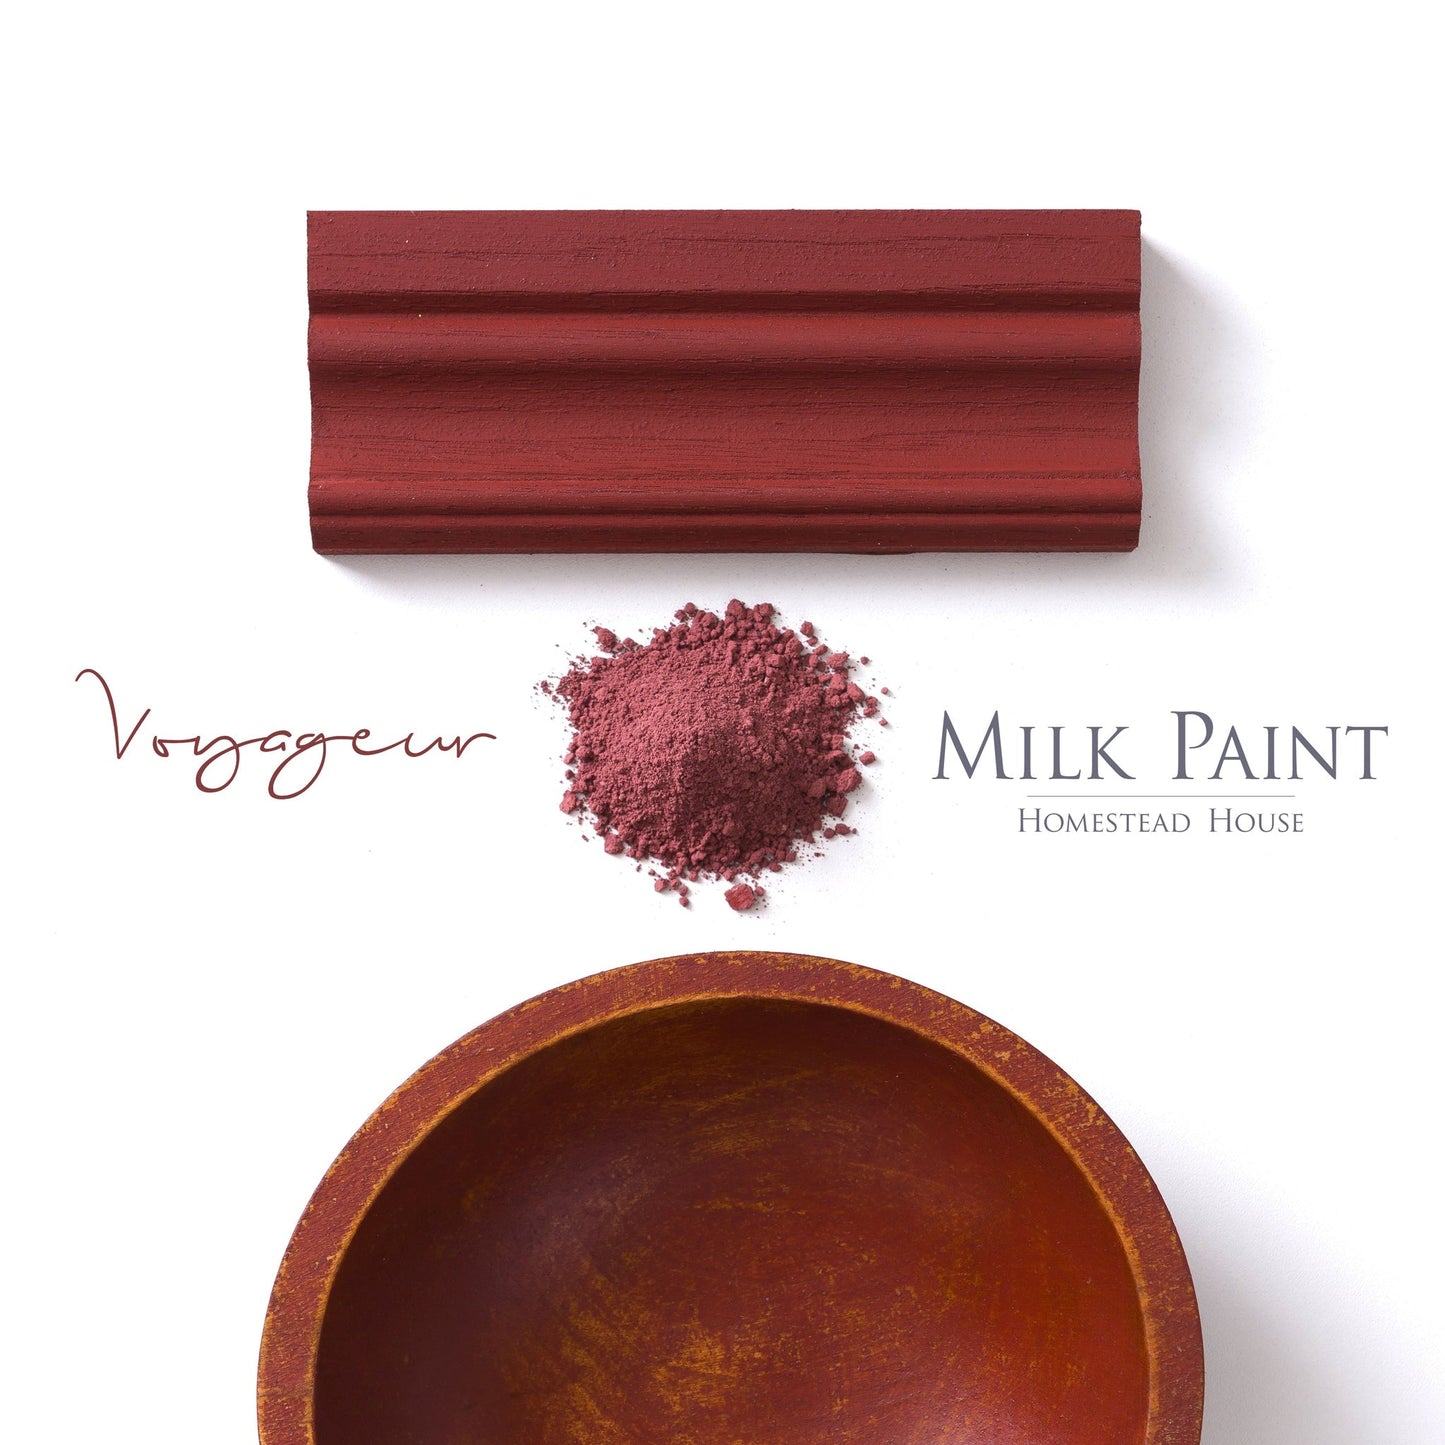 Milk Paint from Homestead House in Voyageur - Deep red with a rusty brick colour hue. | homesteadhouse.ca